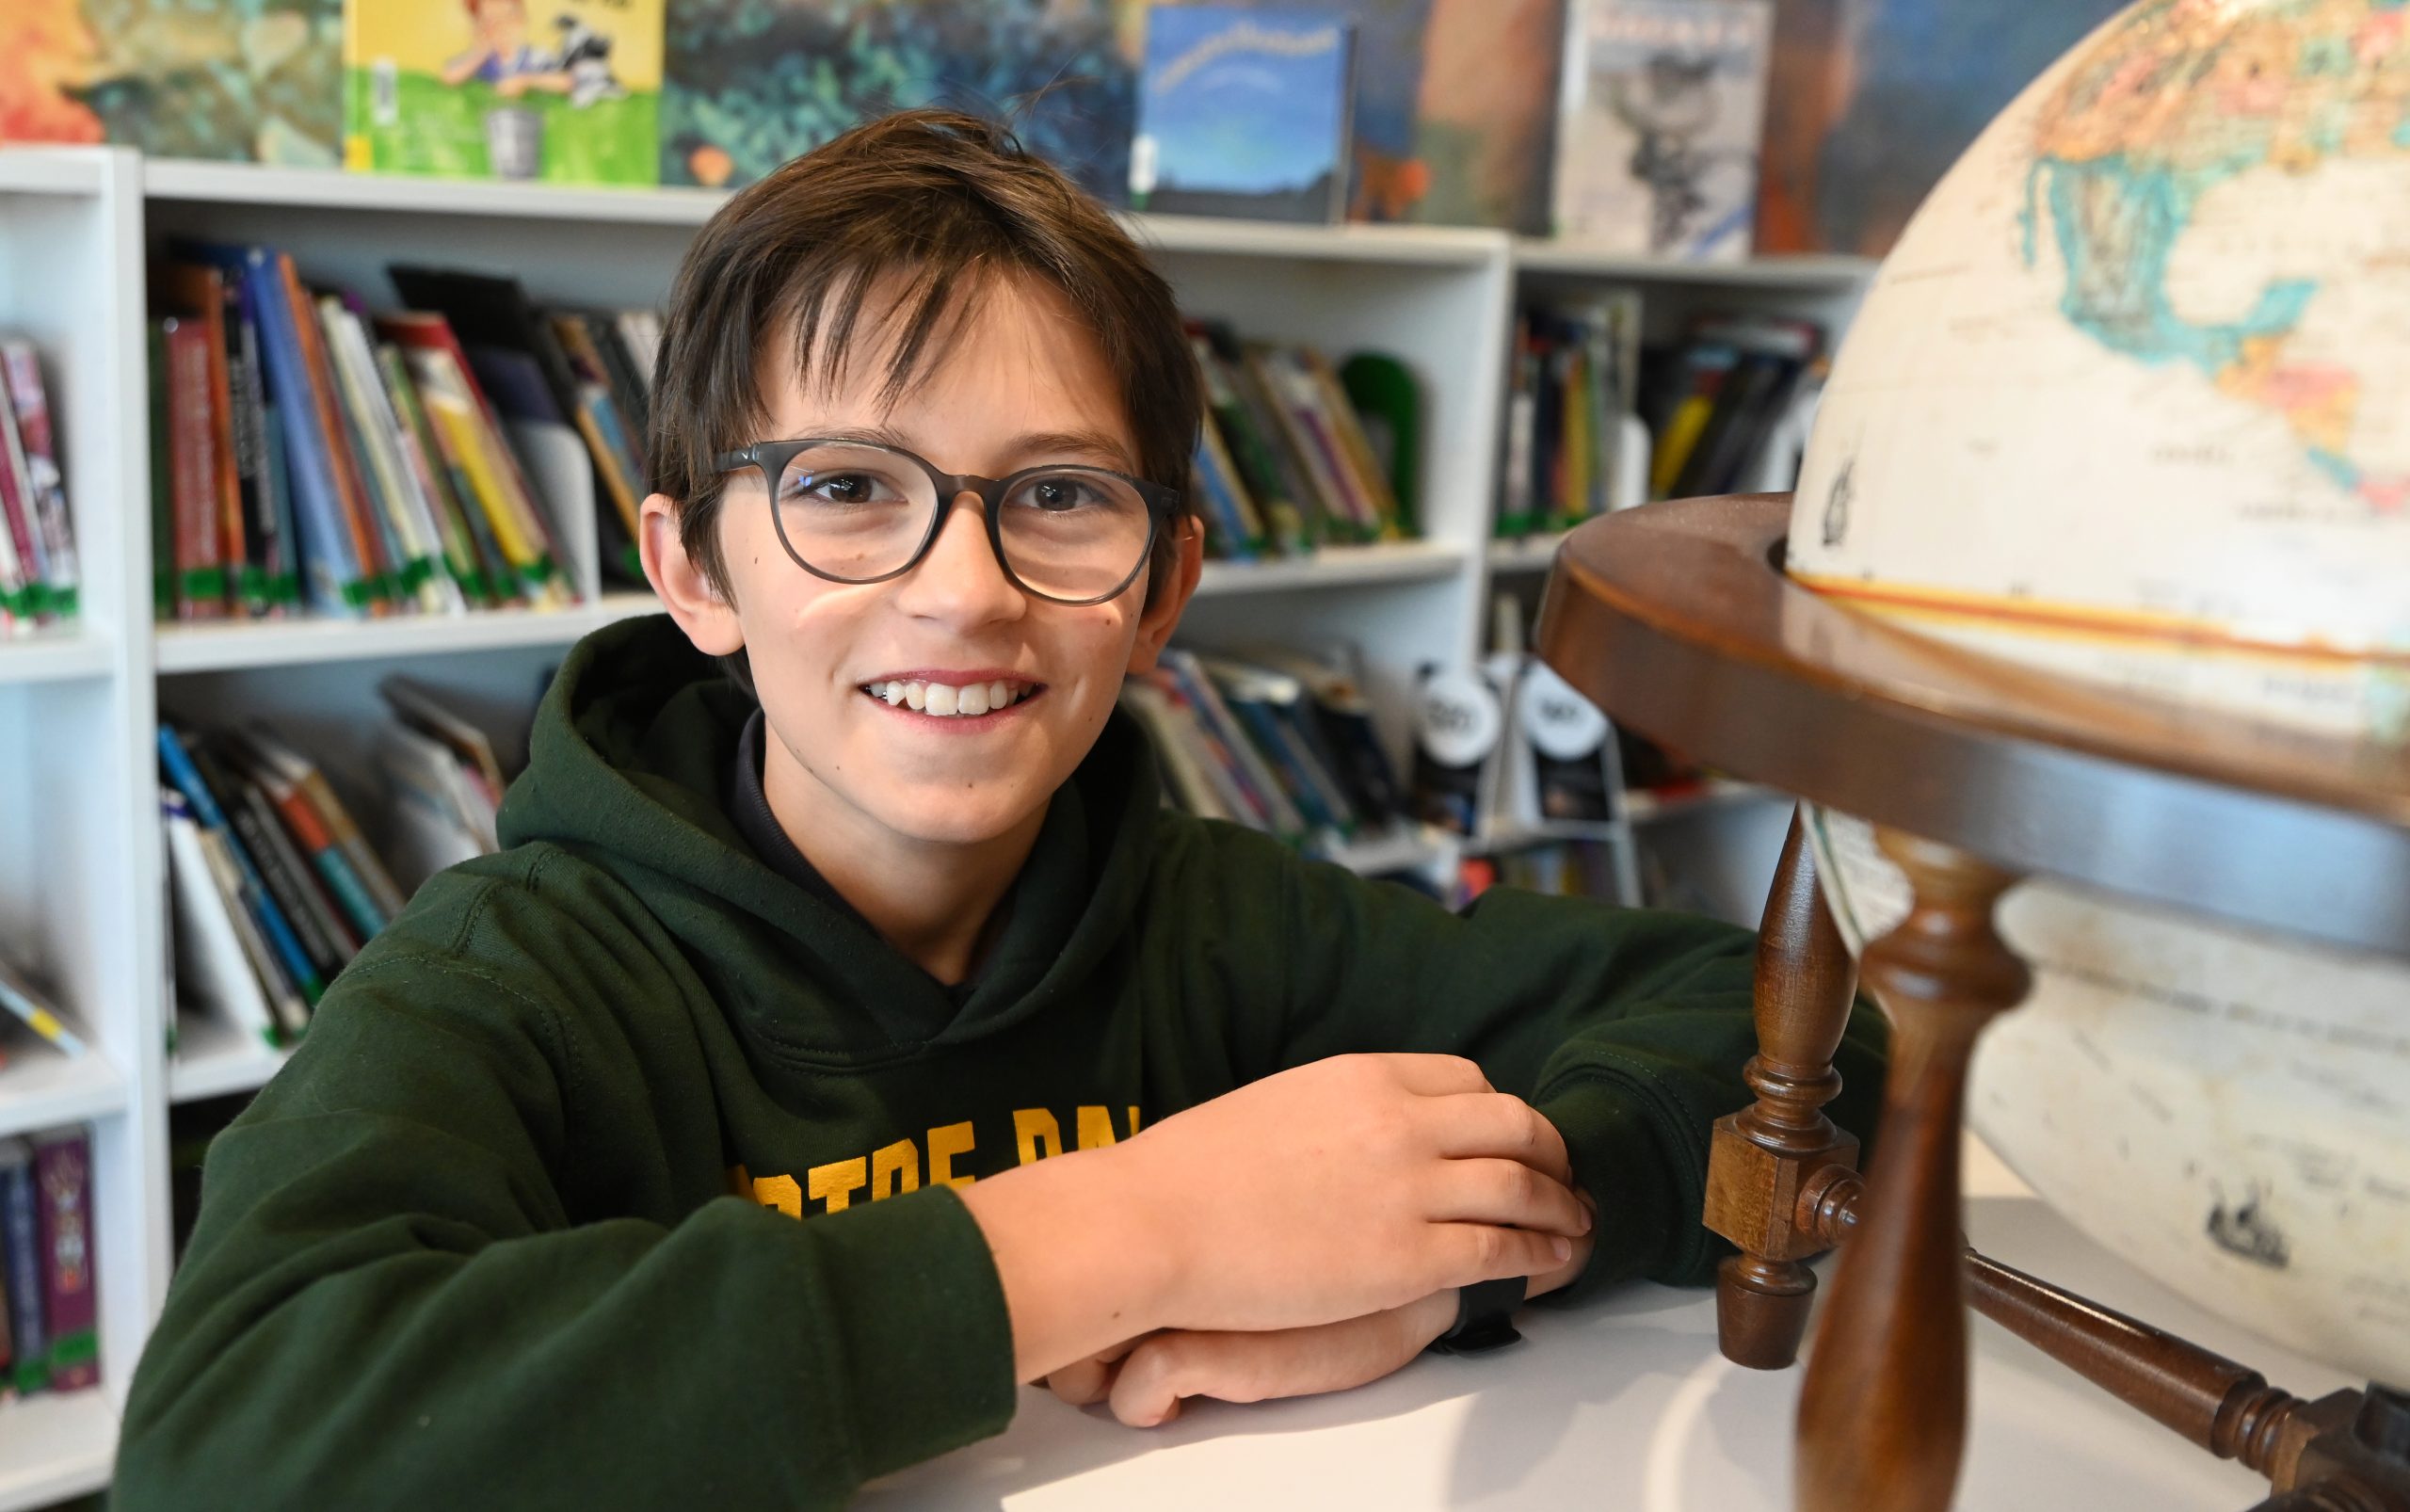 Notre Dame of De Pere student sits next to globe.